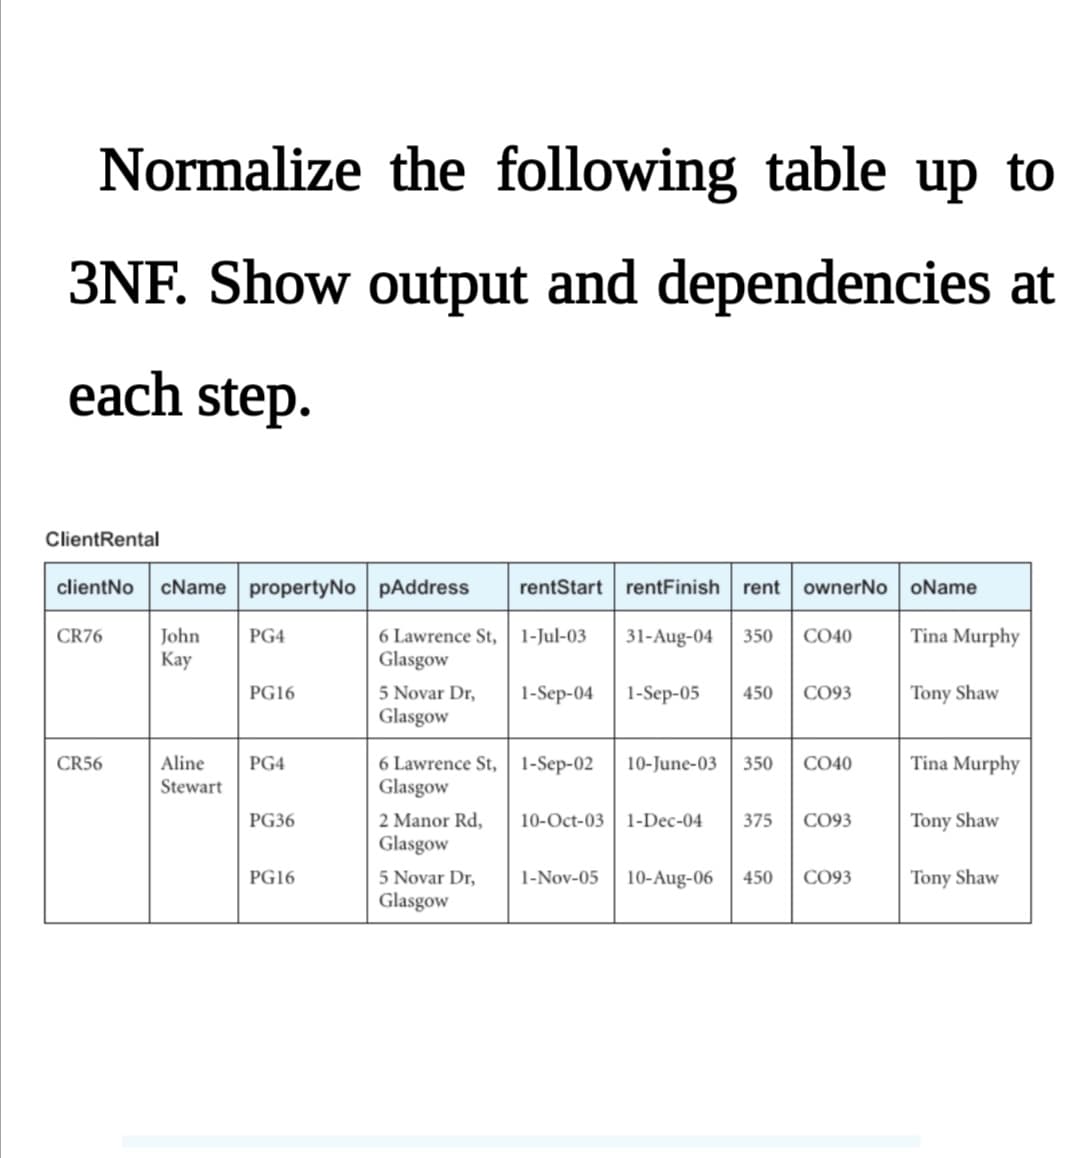 Normalize the following table up to
3NF. Show output and dependencies at
each step.
ClientRental
clientNo
cName propertyNo pAddress
rentStart rentFinish
rent ownerNo oName
CR76
PG4
Tina Murphy
John
Кay
6 Lawrence St, 1-Jul-03
Glasgow
31-Aug-04
350
CO40
5 Novar Dr,
Glasgow
PG16
1-Sep-04
1-Sep-05
450
CO93
Tony Shaw
6 Lawrence St, 1-Sep-02
Glasgow
Tina Murphy
Aline
Stewart
CR56
PG4
10-June-03
350
CO40
PG36
2 Manor Rd,
10-Oct-03
1-Dec-04
375
CO93
Tony Shaw
Glasgow
5 Novar Dr,
Glasgow
PG16
1-Nov-05
10-Aug-06
450
CO93
Tony Shaw
